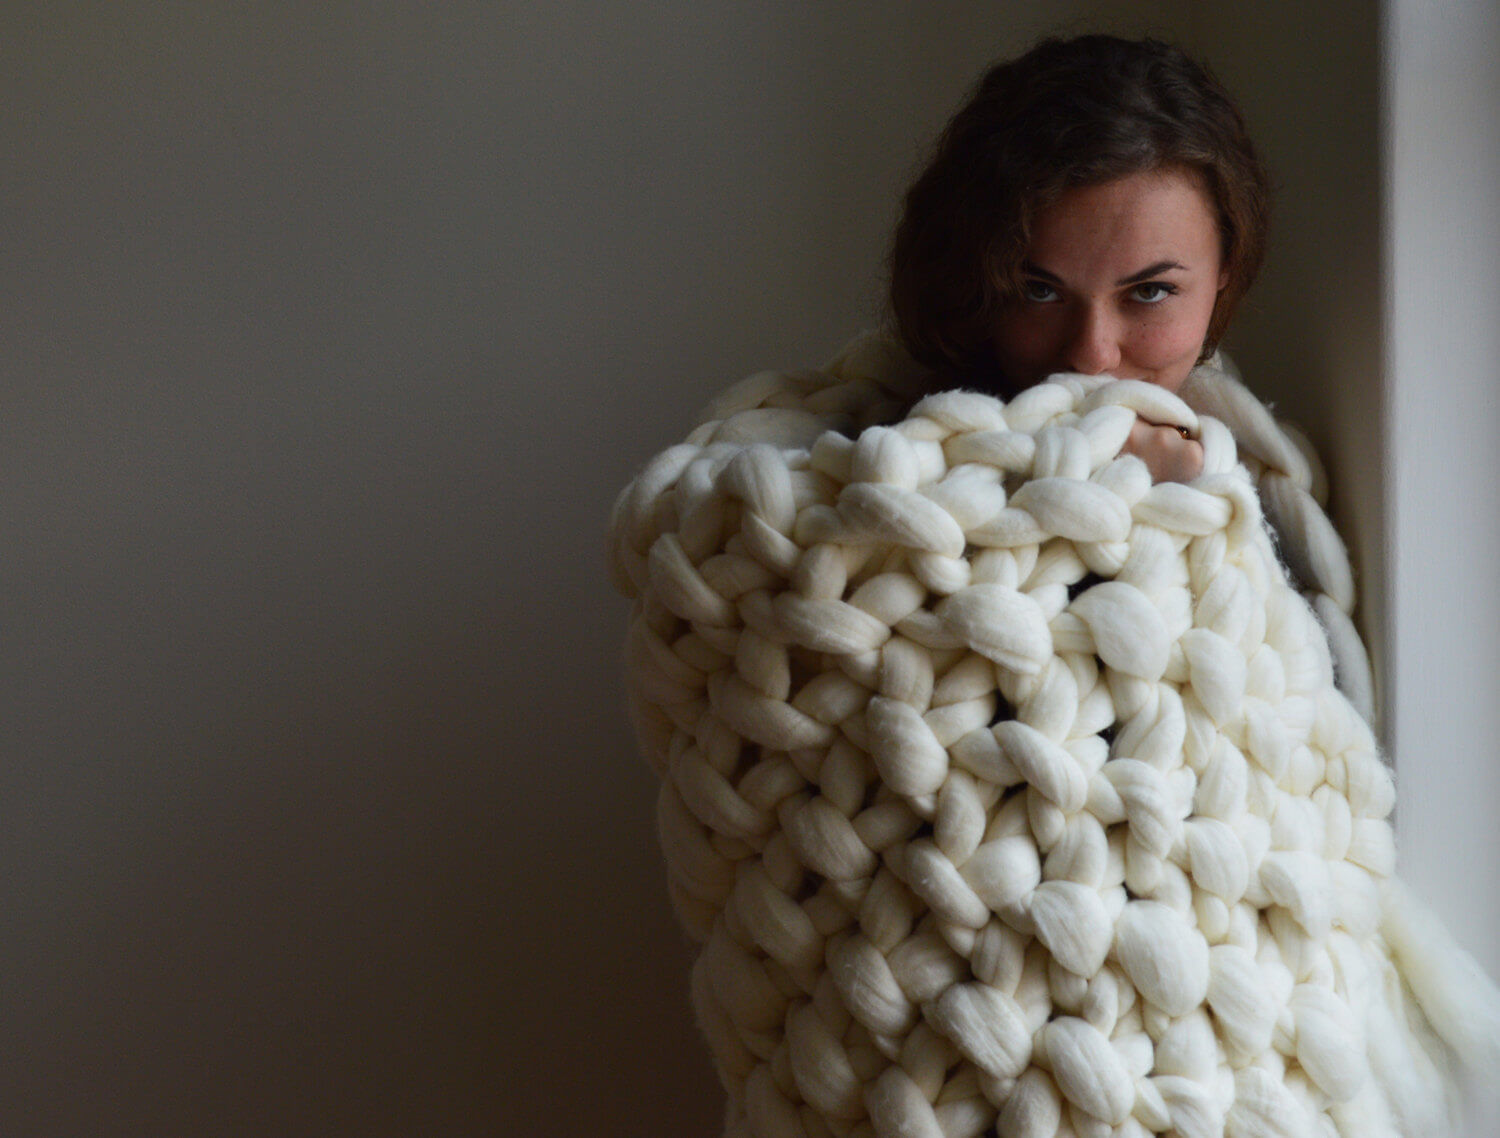 Chunky Knit Blanket - Throws with Tassels - Metfine